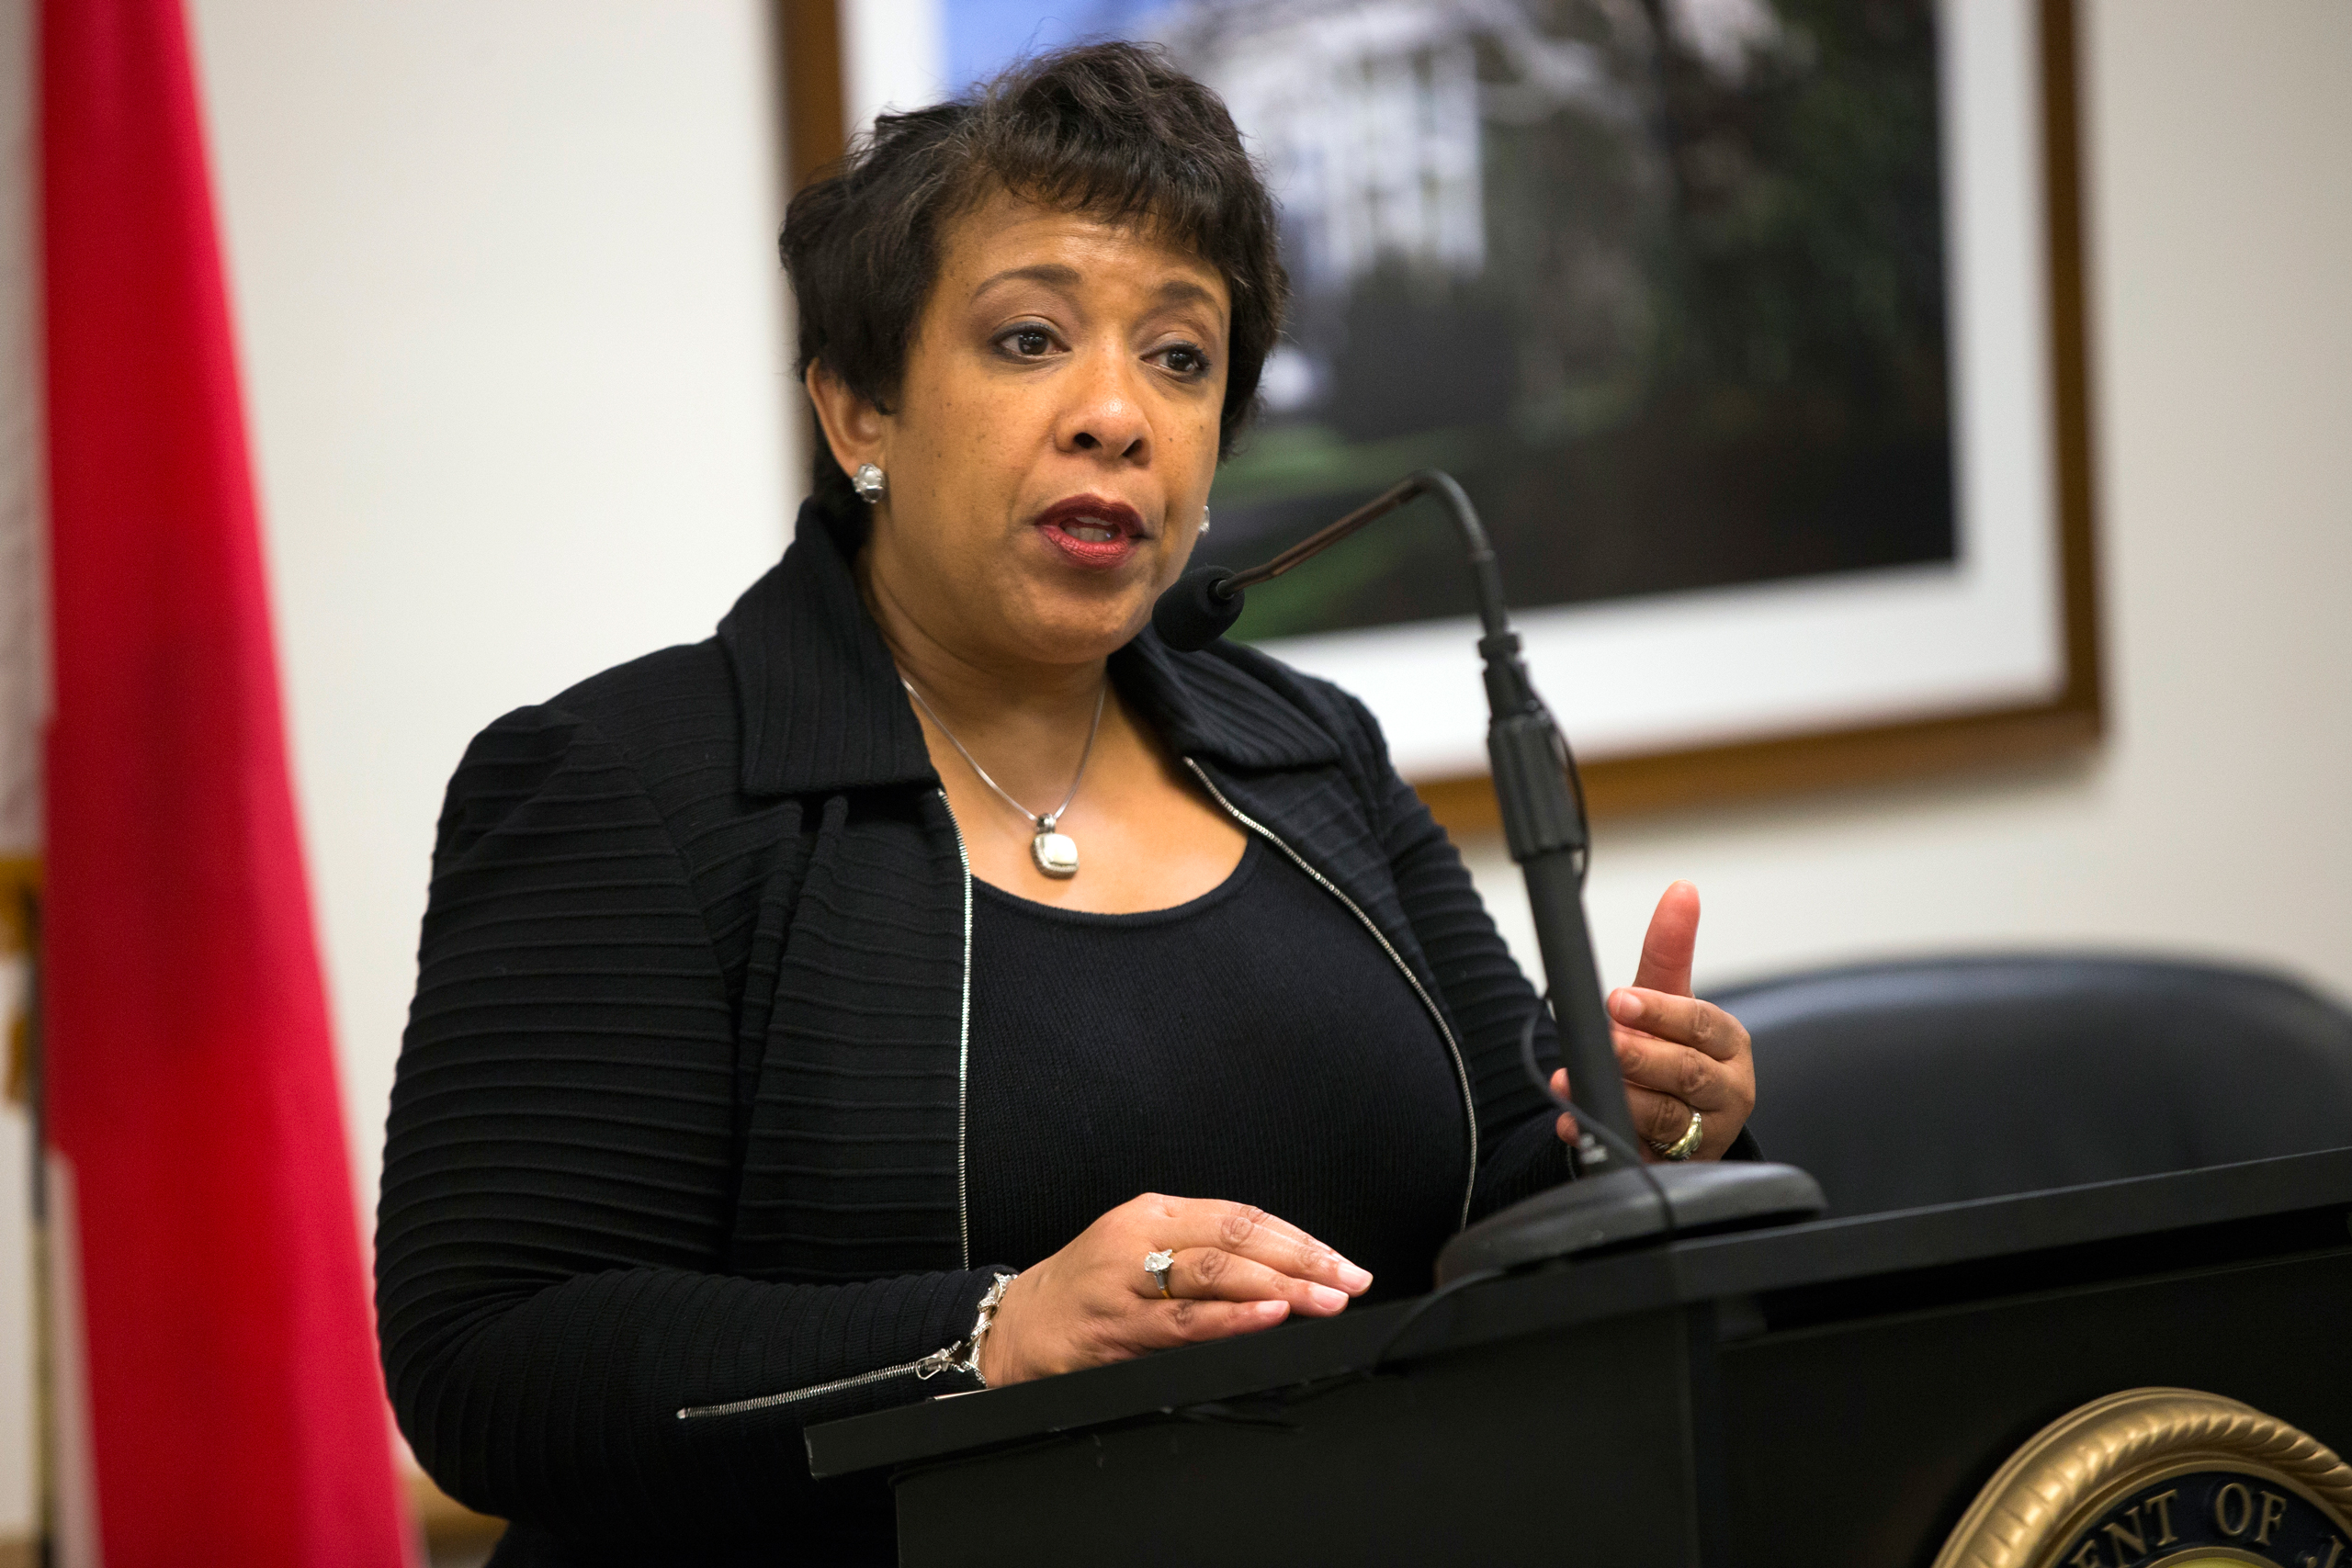 Attorney General Loretta Lynch speaks during an event to highlight policies that aim to reduce barriers for formerly incarcerated individuals in Mobile, Ala., on April 29, 2016. (Evan Vucci—AP)